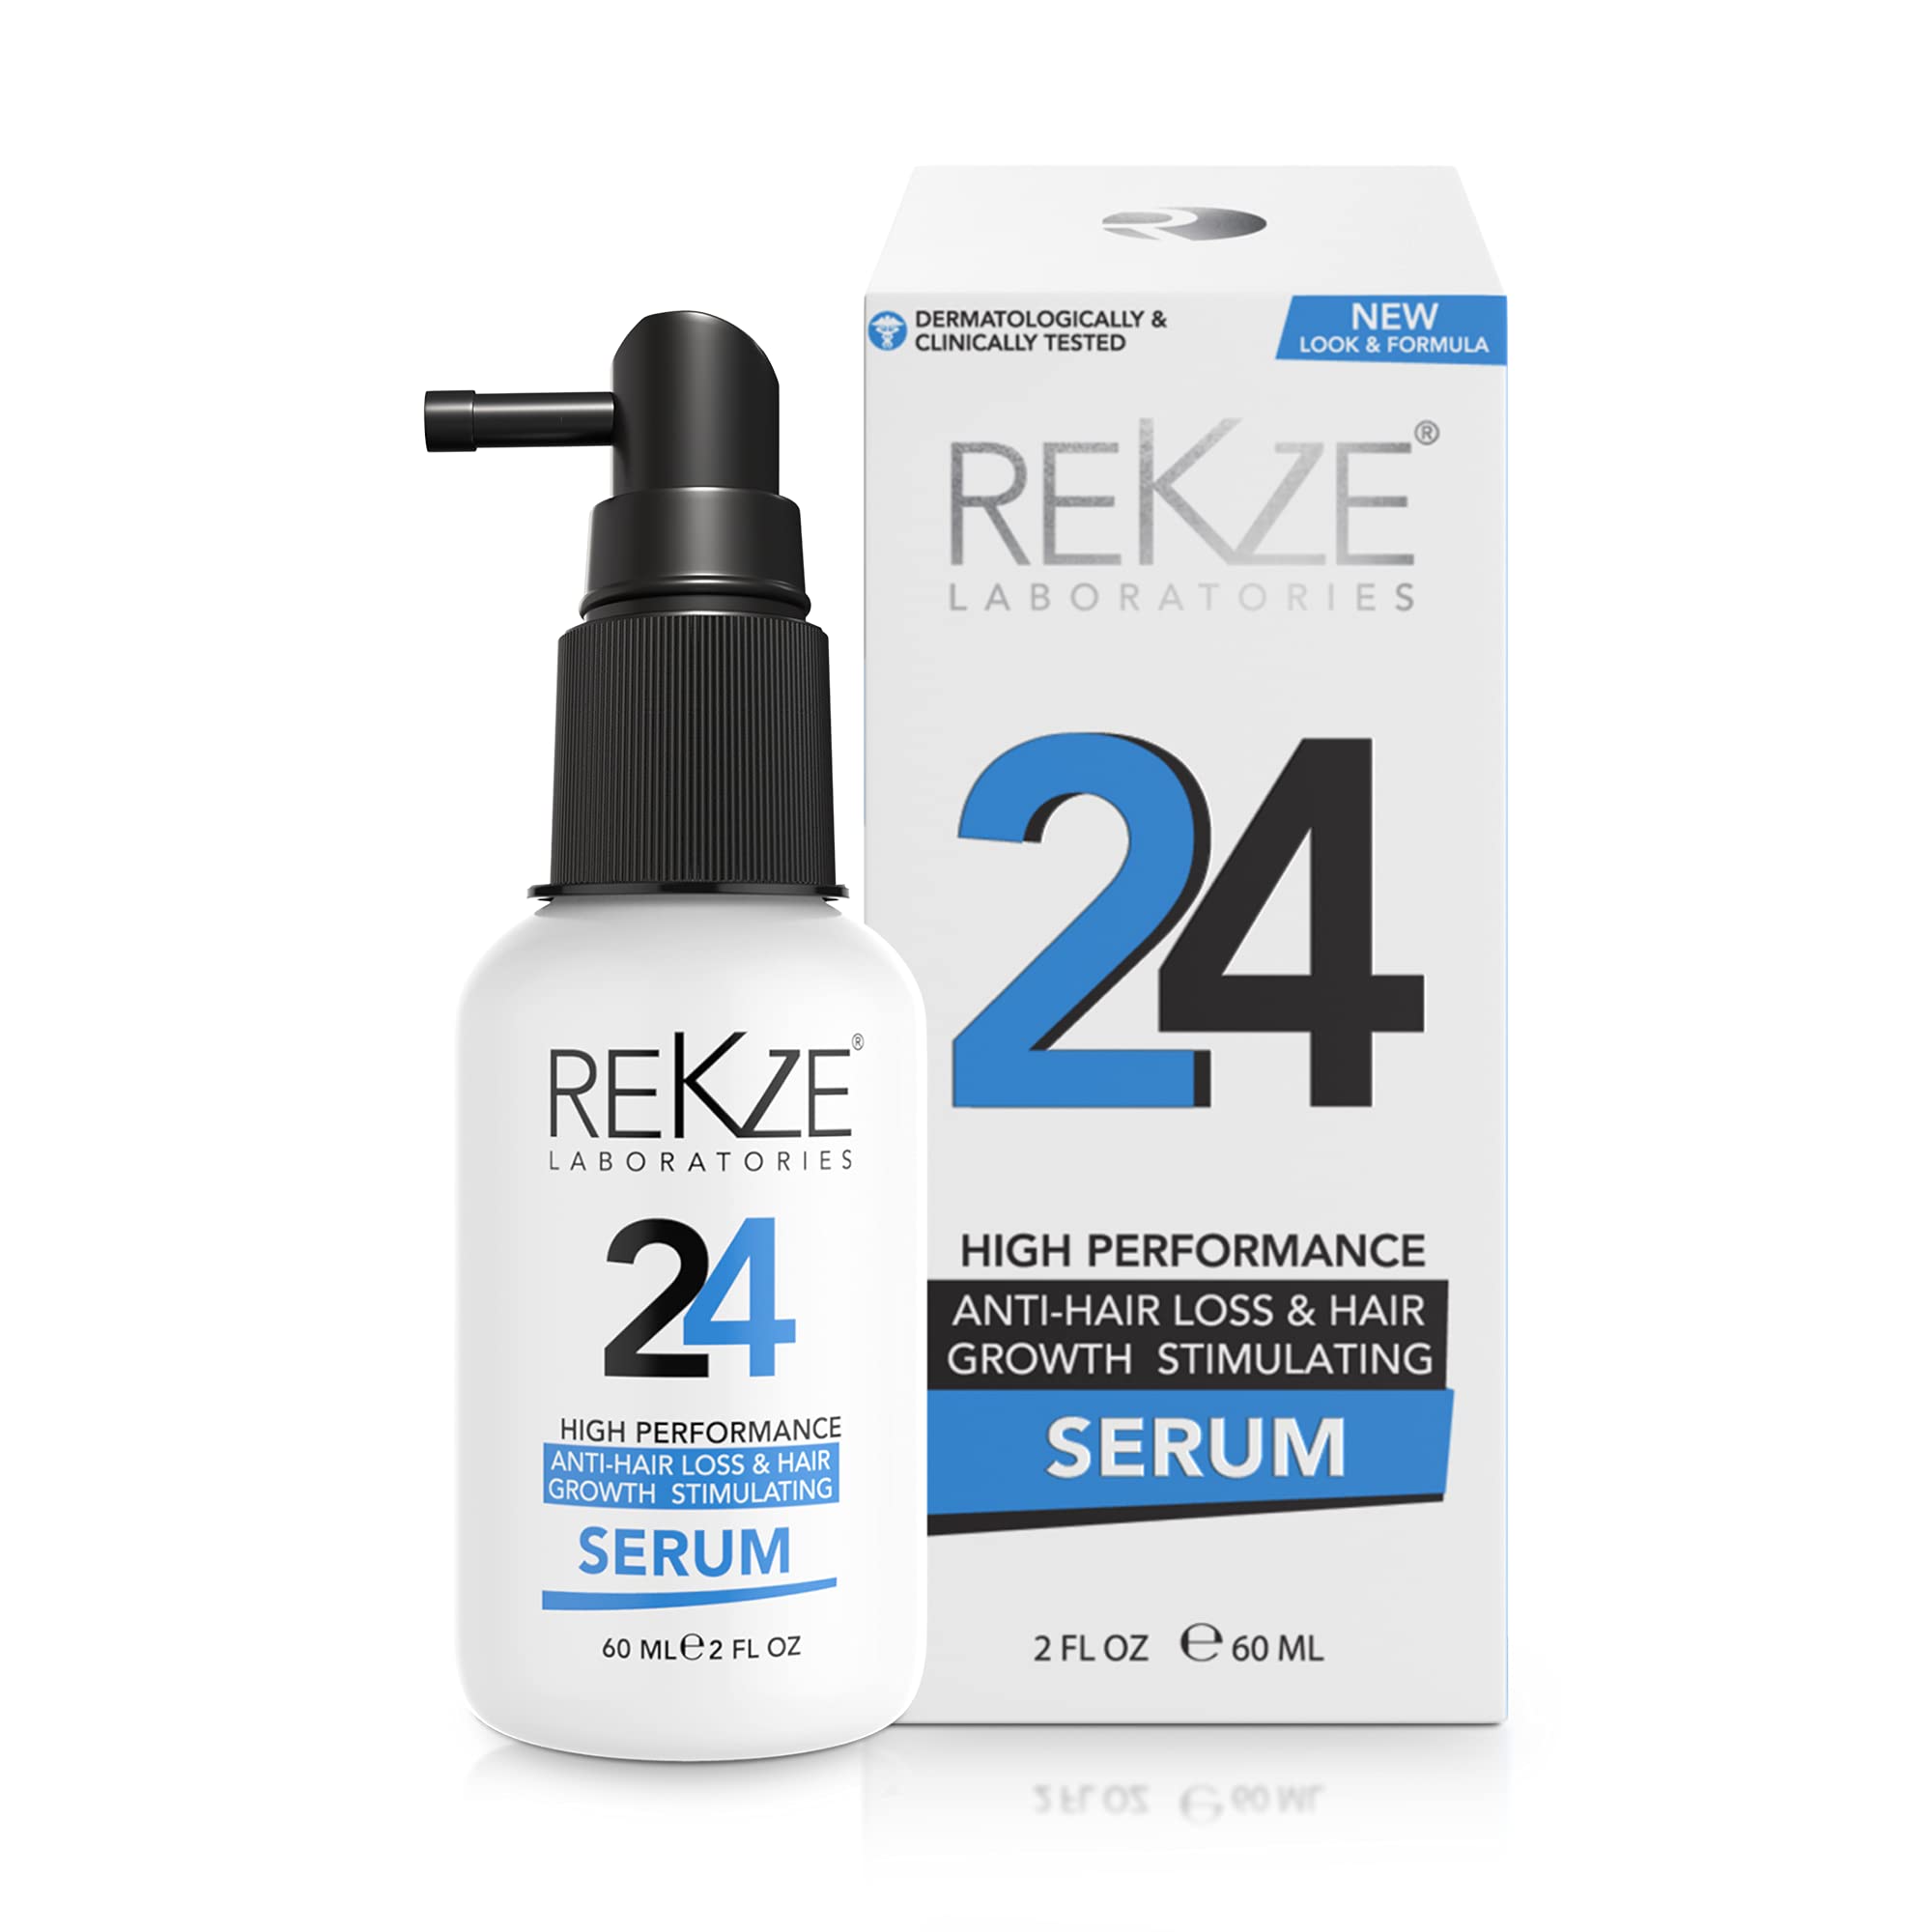 REKZE 24 Serum Treatment Clinically Proven, Best Unique Regrowth Formula With 24 Premium Ingredients For Hair Thickening, Anti-Hair Loss & Thinning...